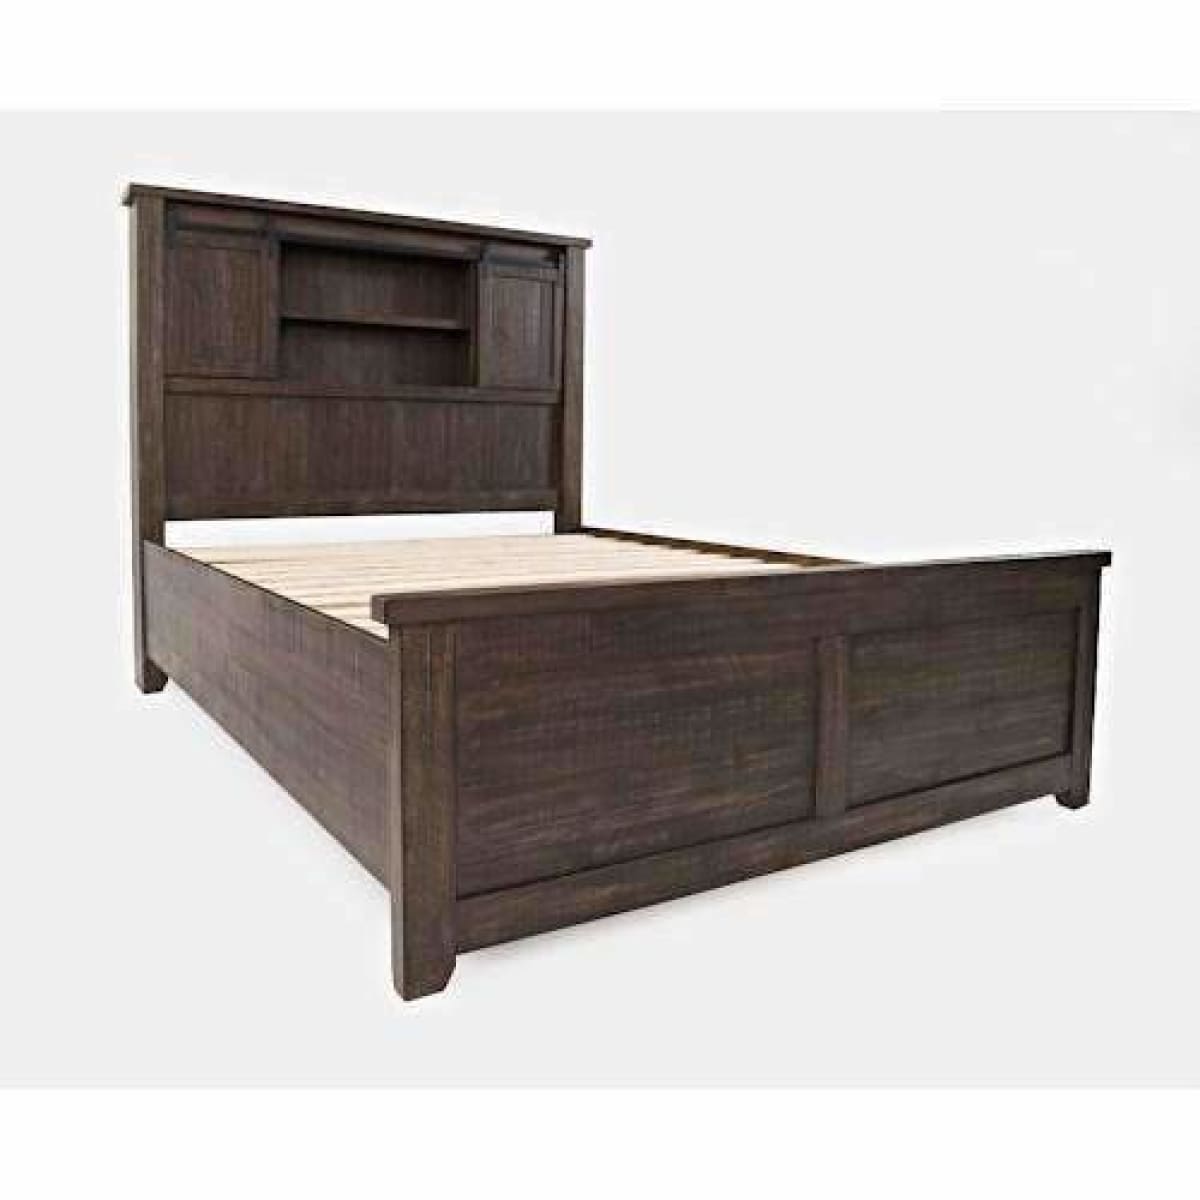 Madison Country Barn Door Bed -Brown - BED